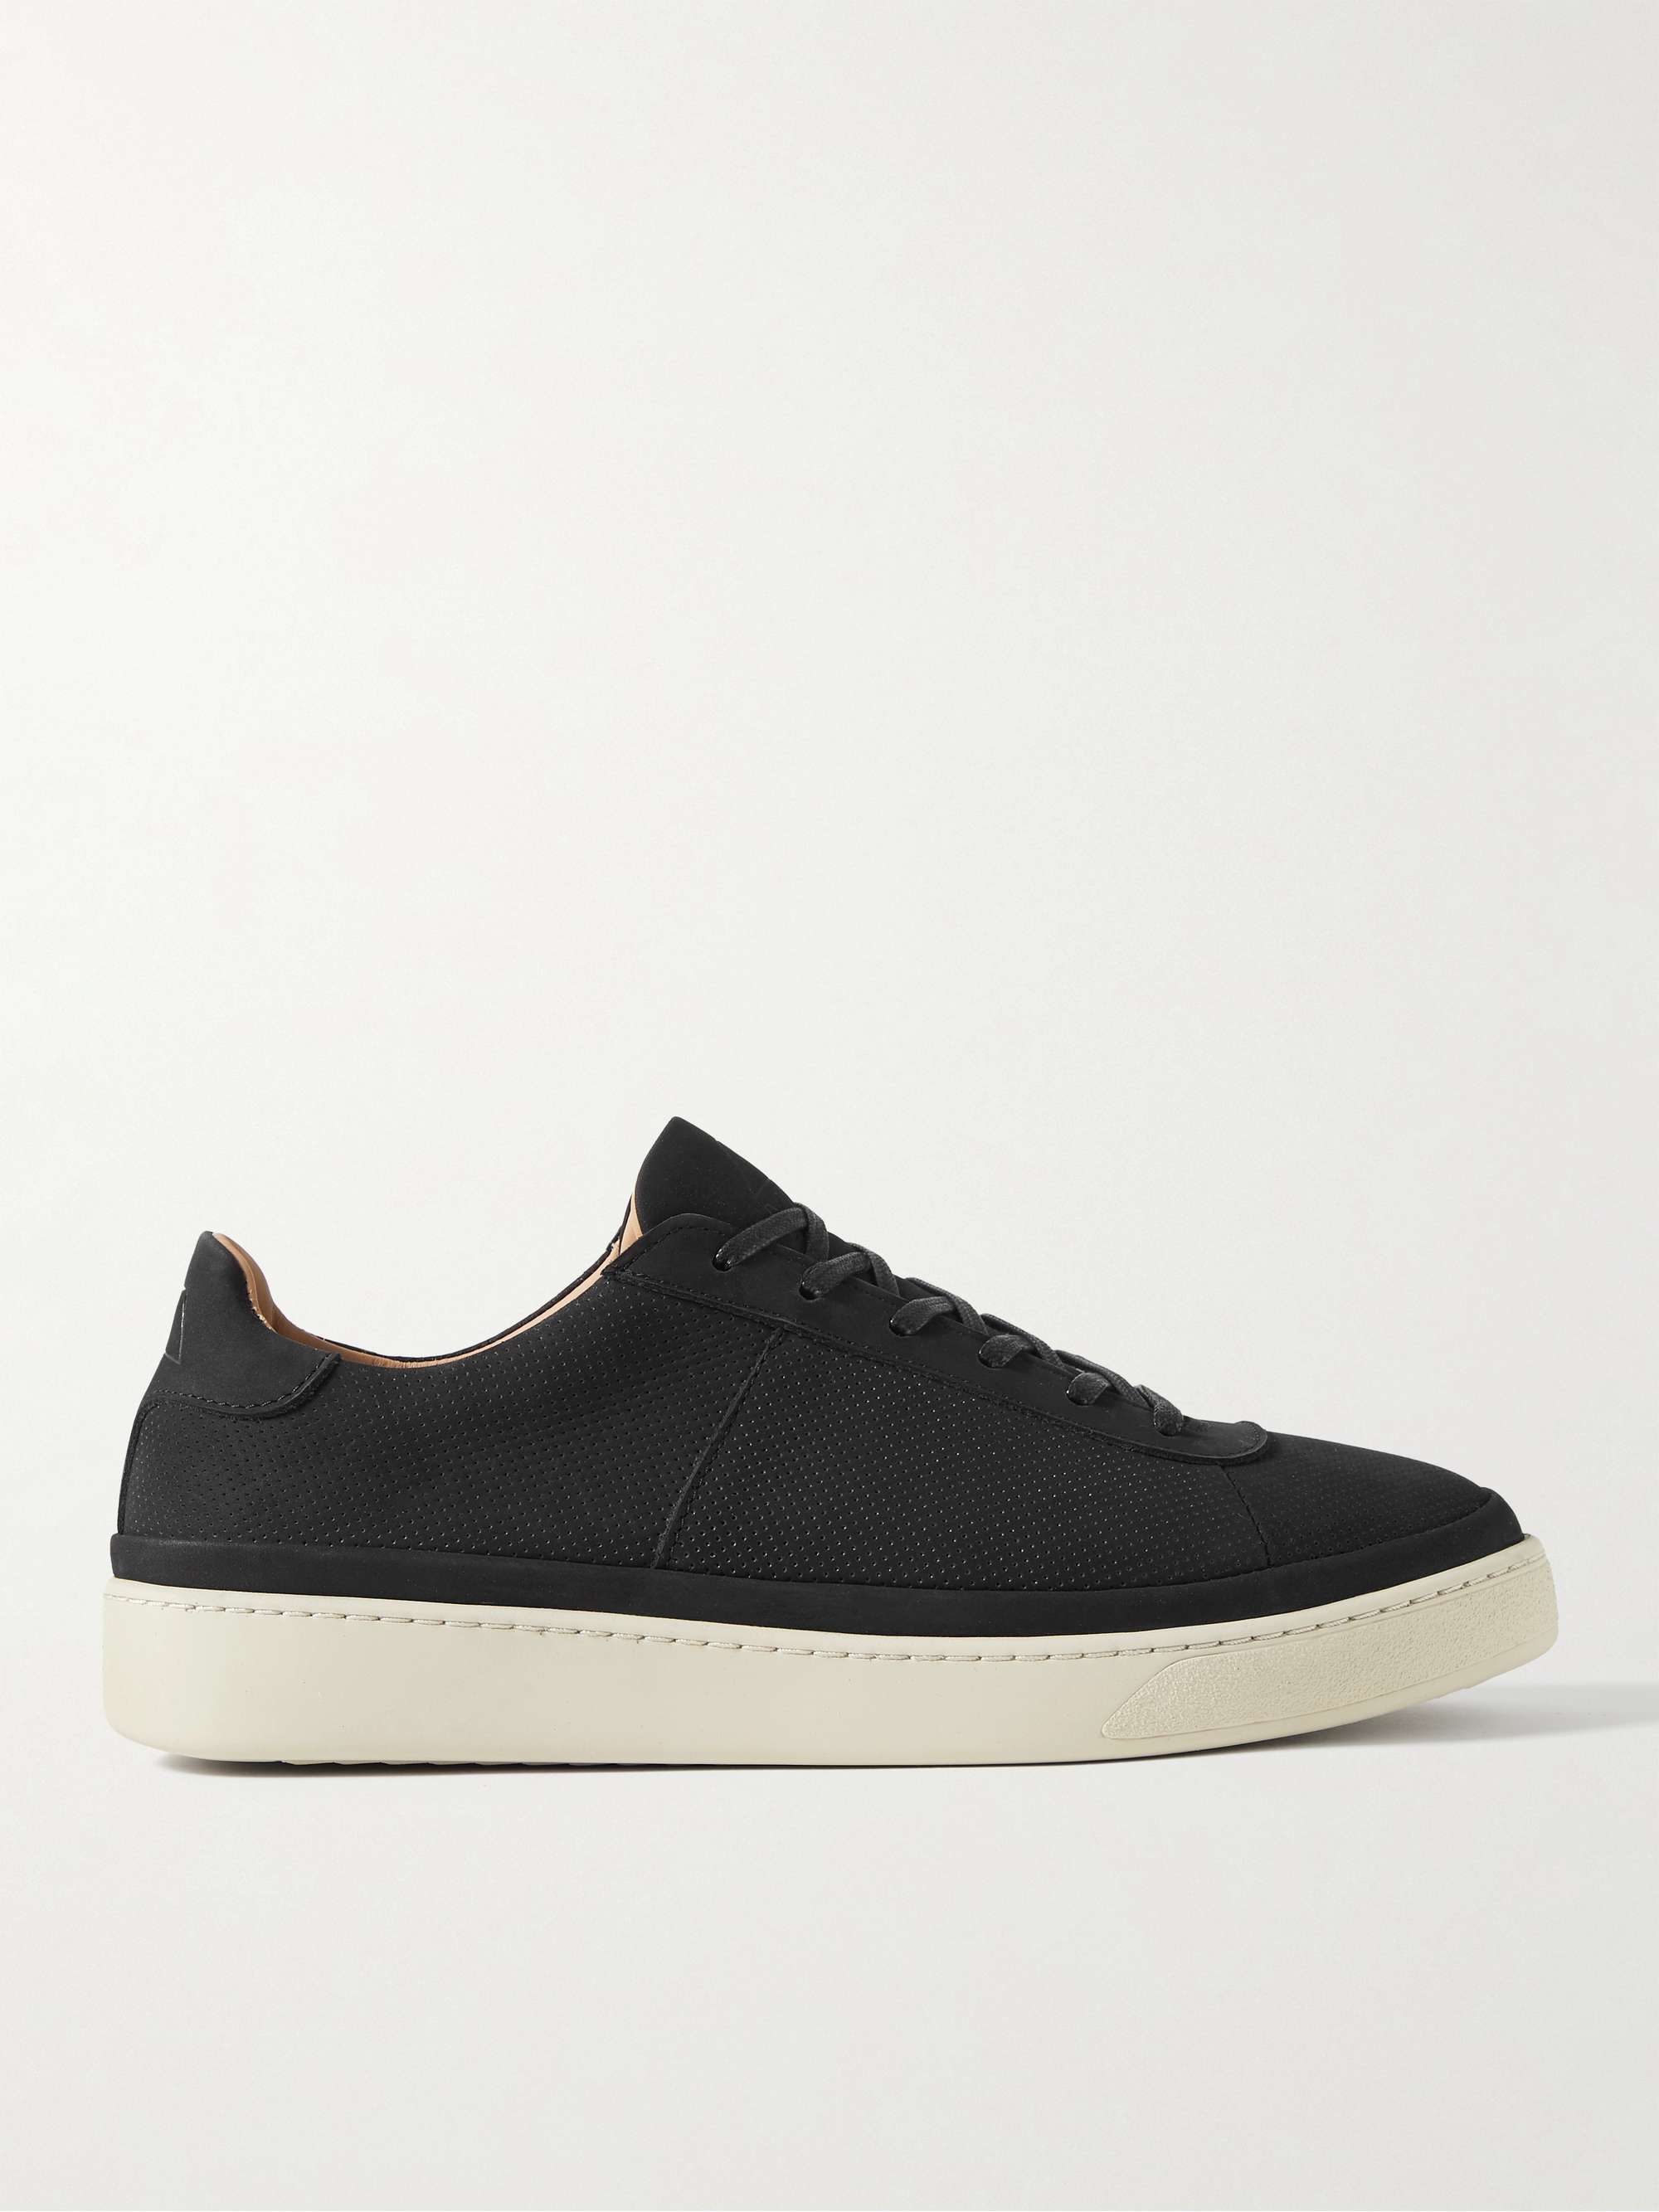 Vince - Blair Black Perforated Leather Slip-On Sneaker